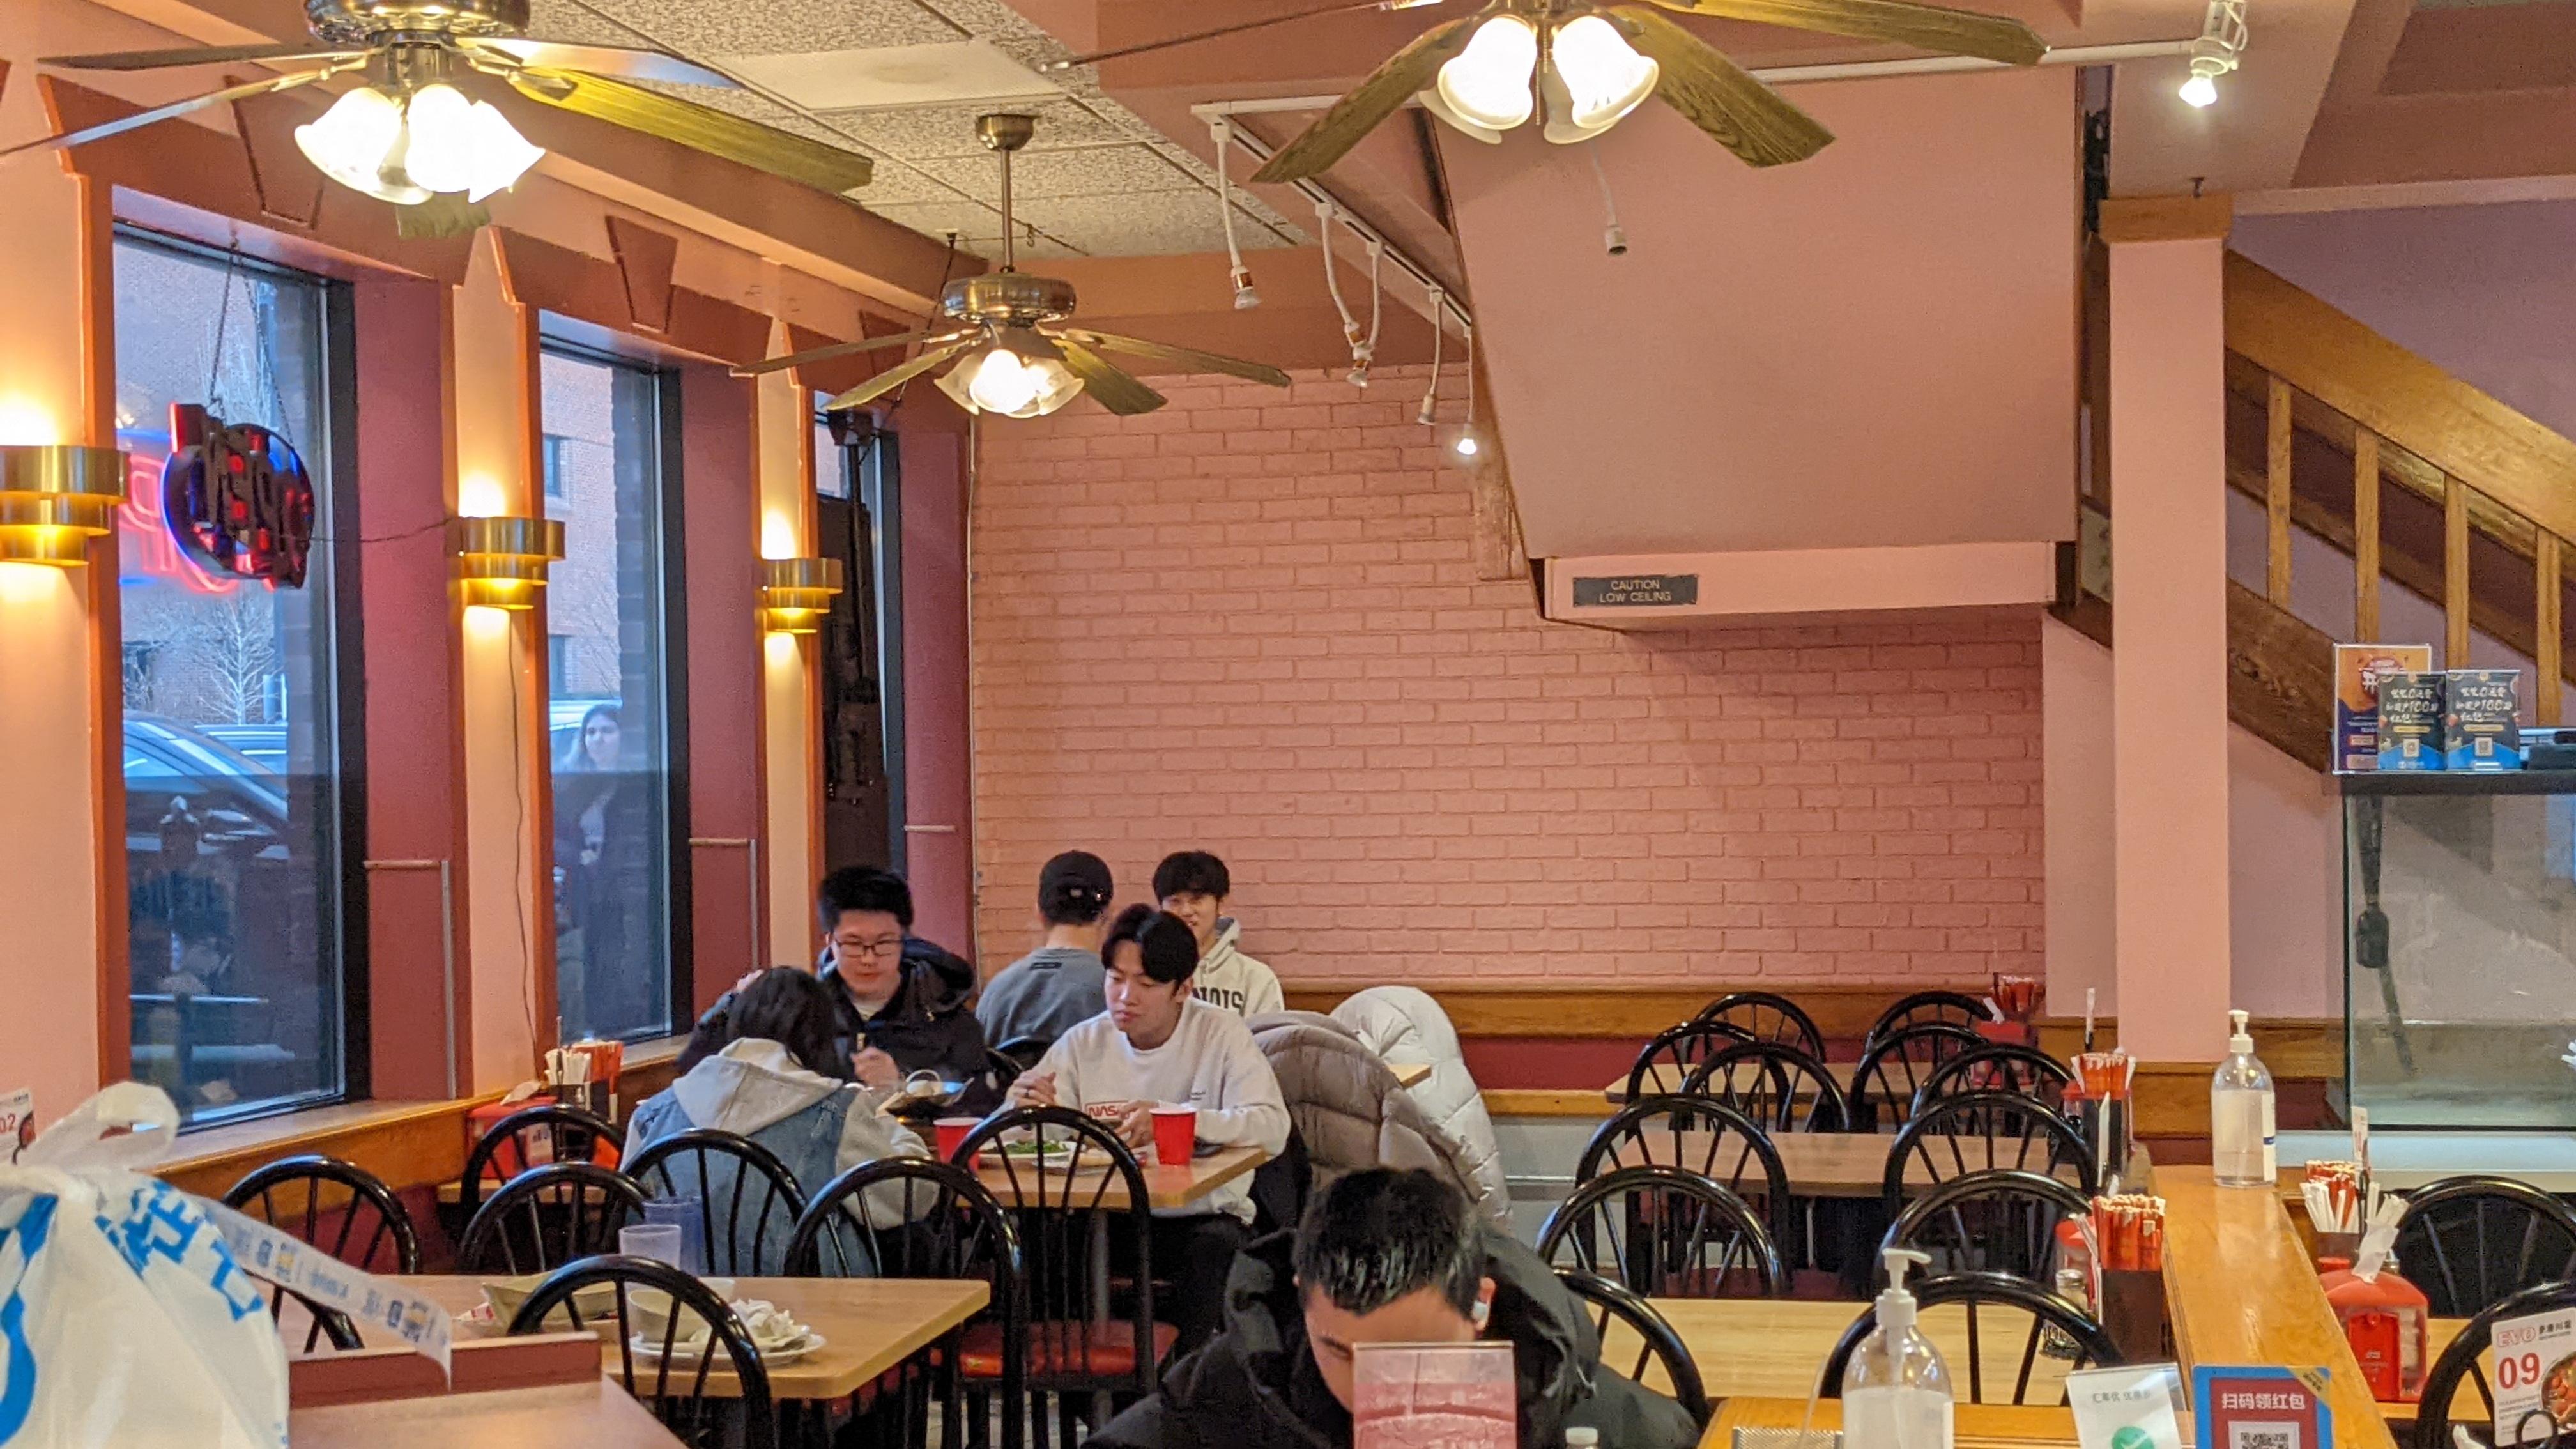 Inside Evo Cafe, there are diners seated at tables with black metal chairs. The brick walls are painted light pink, and the overhead ceiling fans are traditional style and lit. Photo by Tayler Neumann.